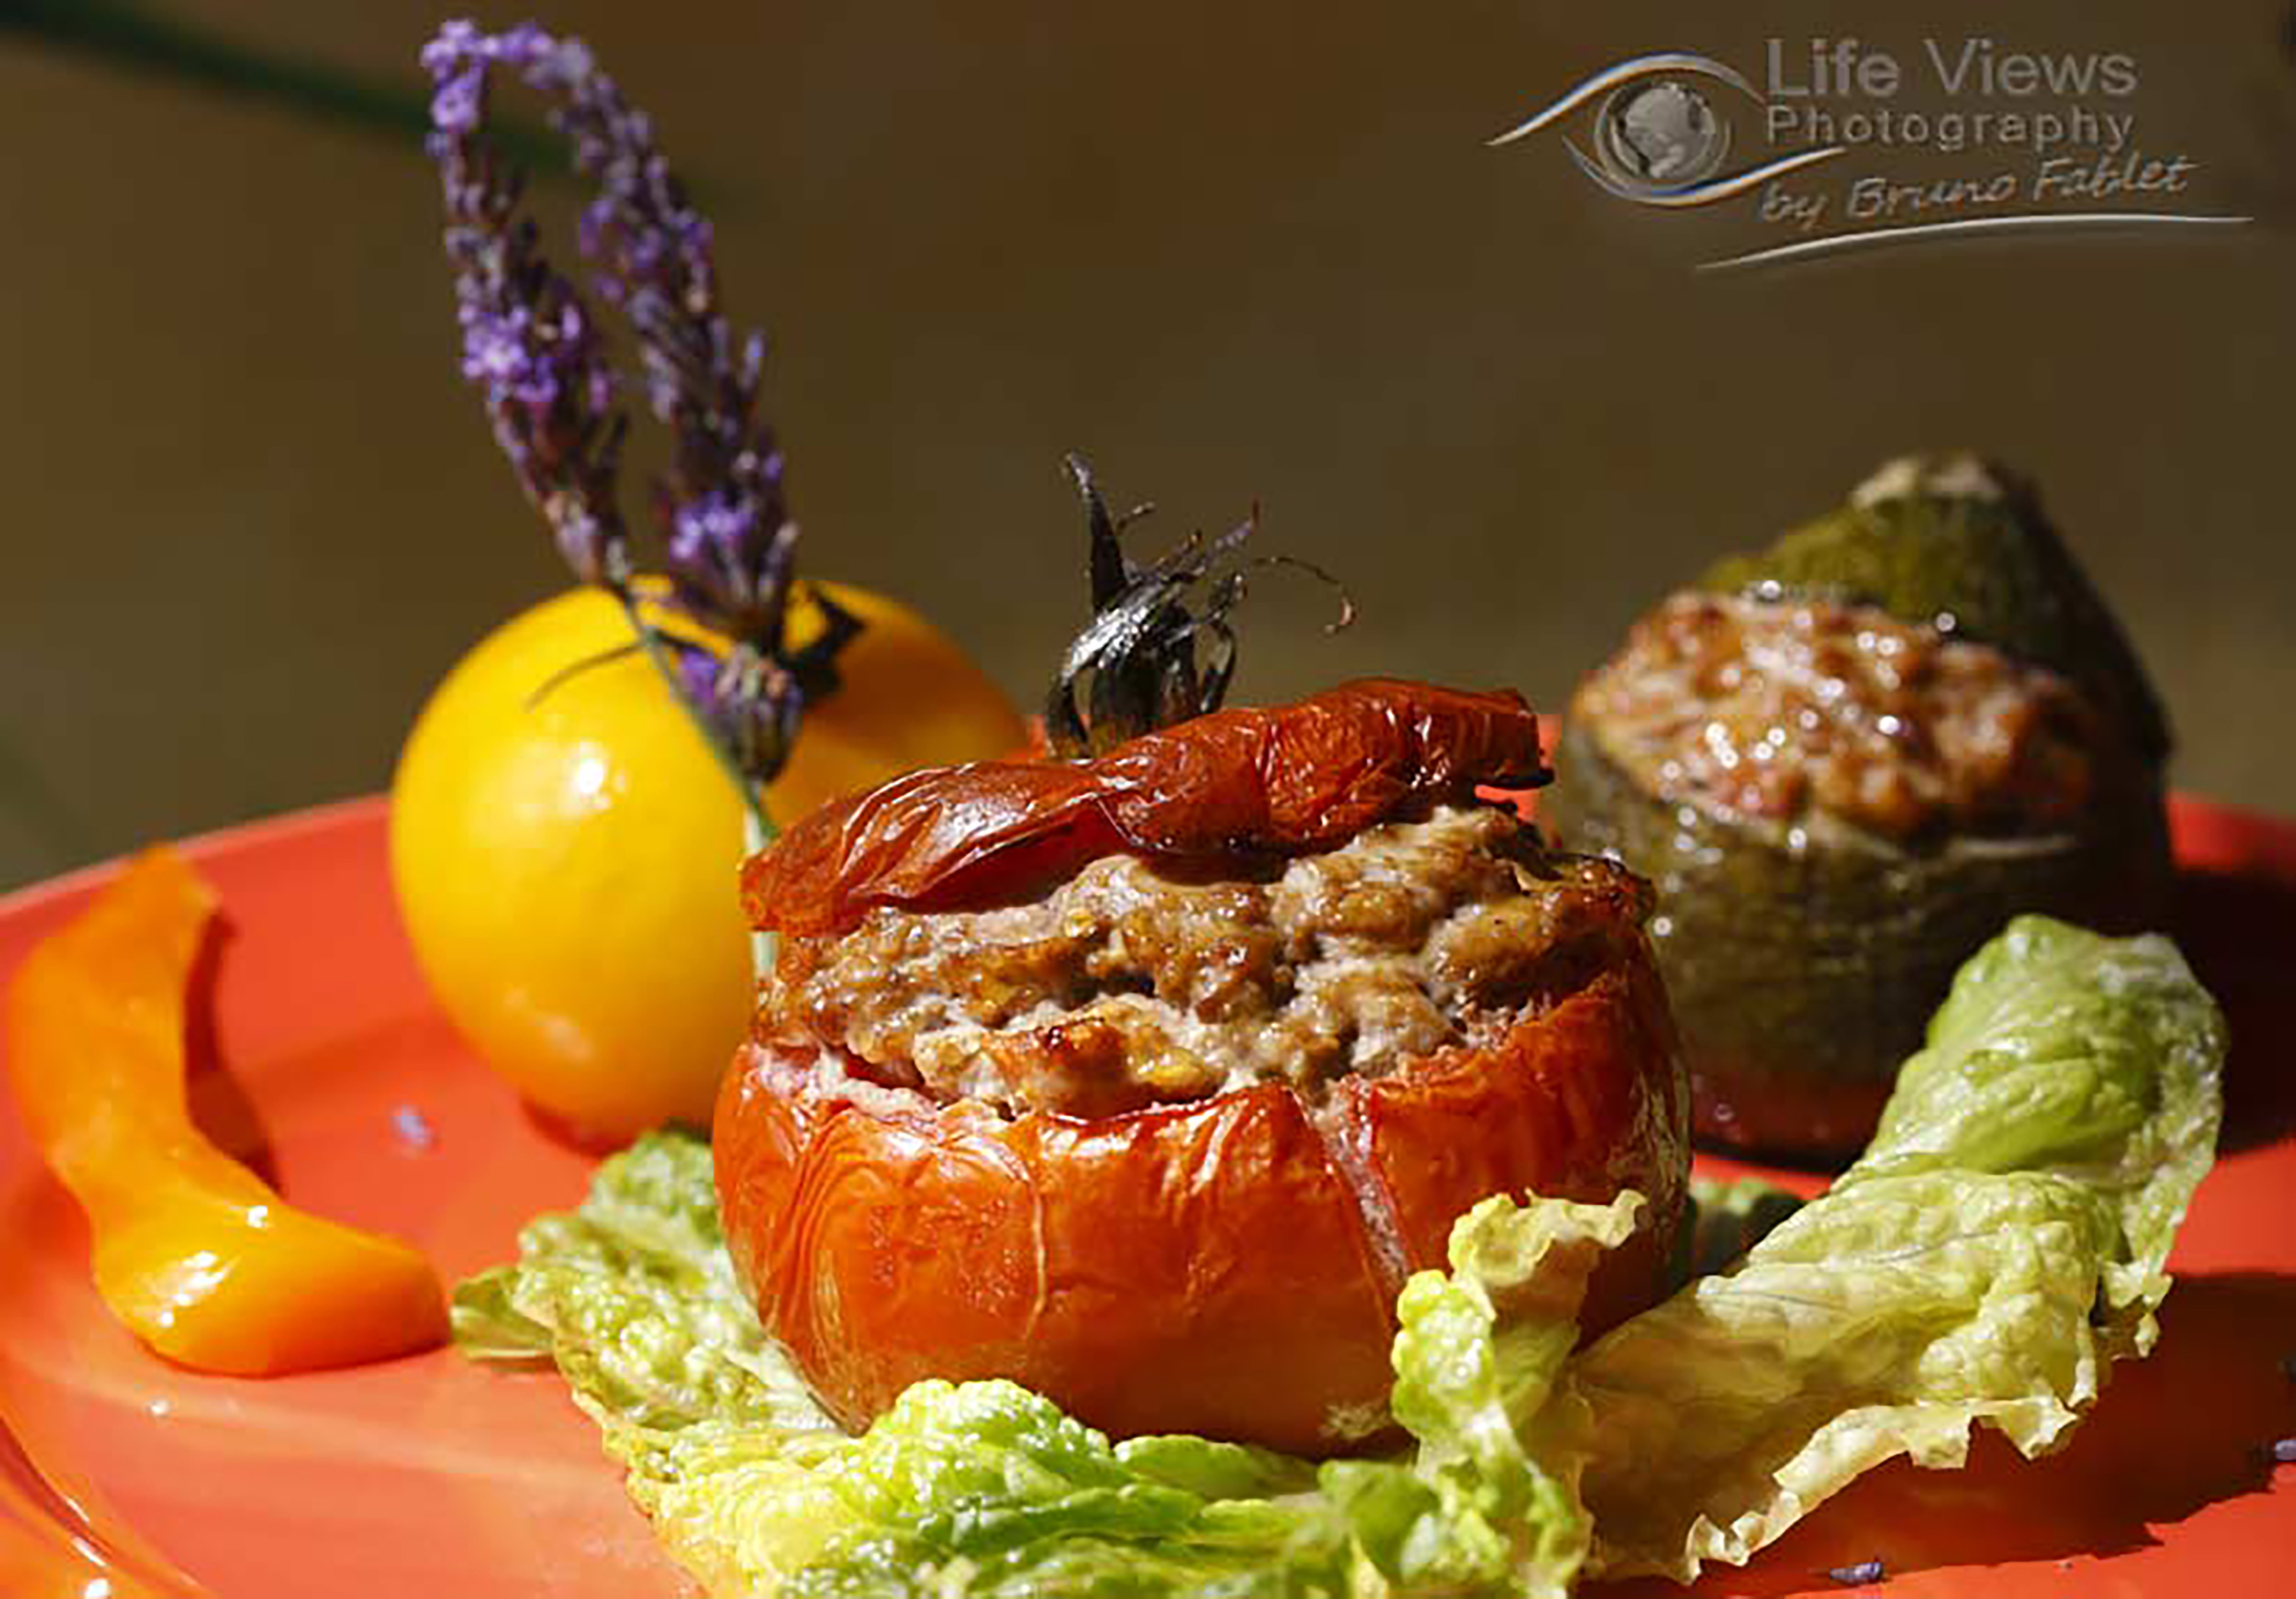 Photographie culinaire Life Views